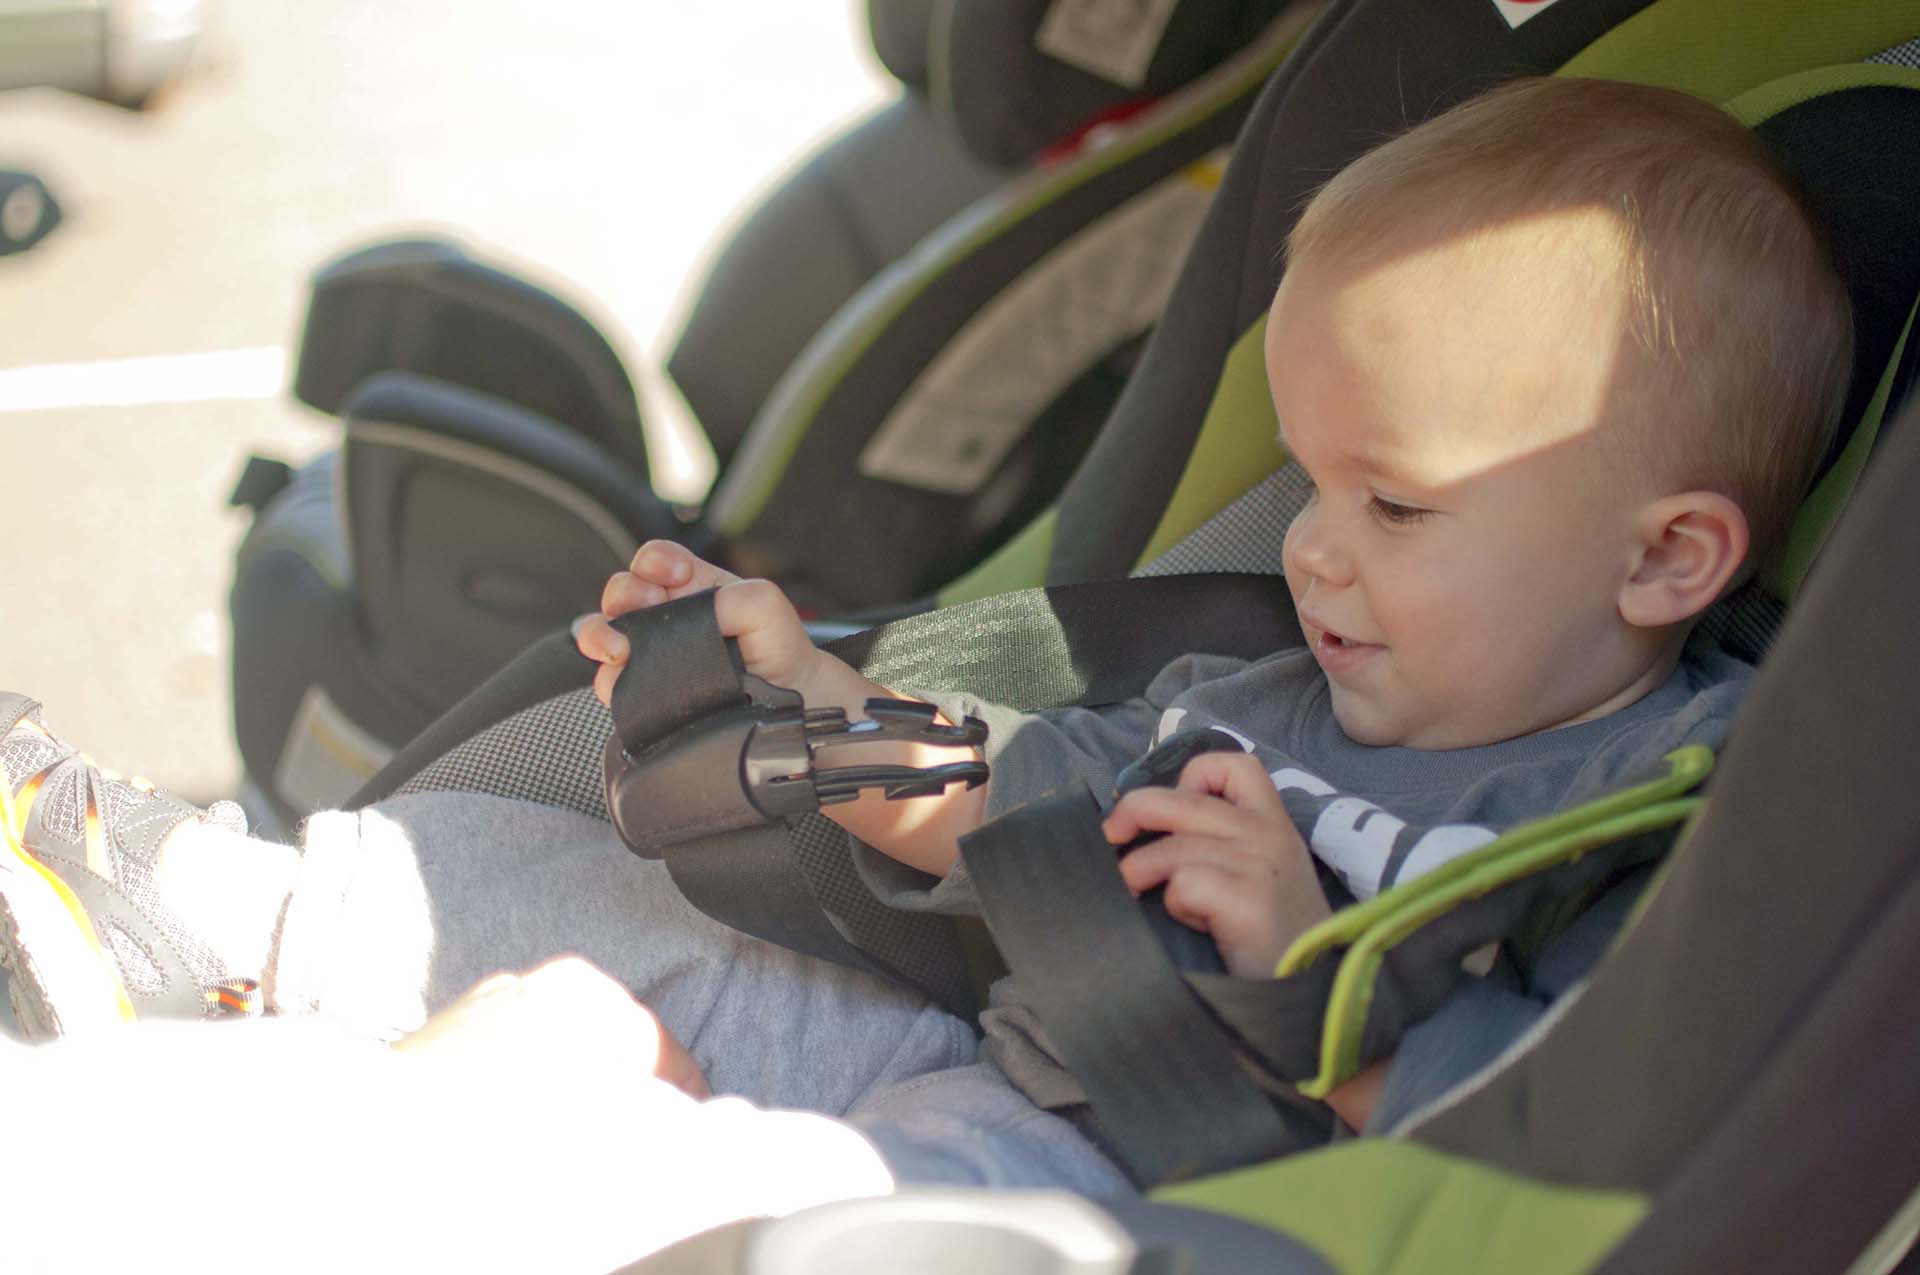 Thrifty Road Safety Tips for Parents with a New Baby